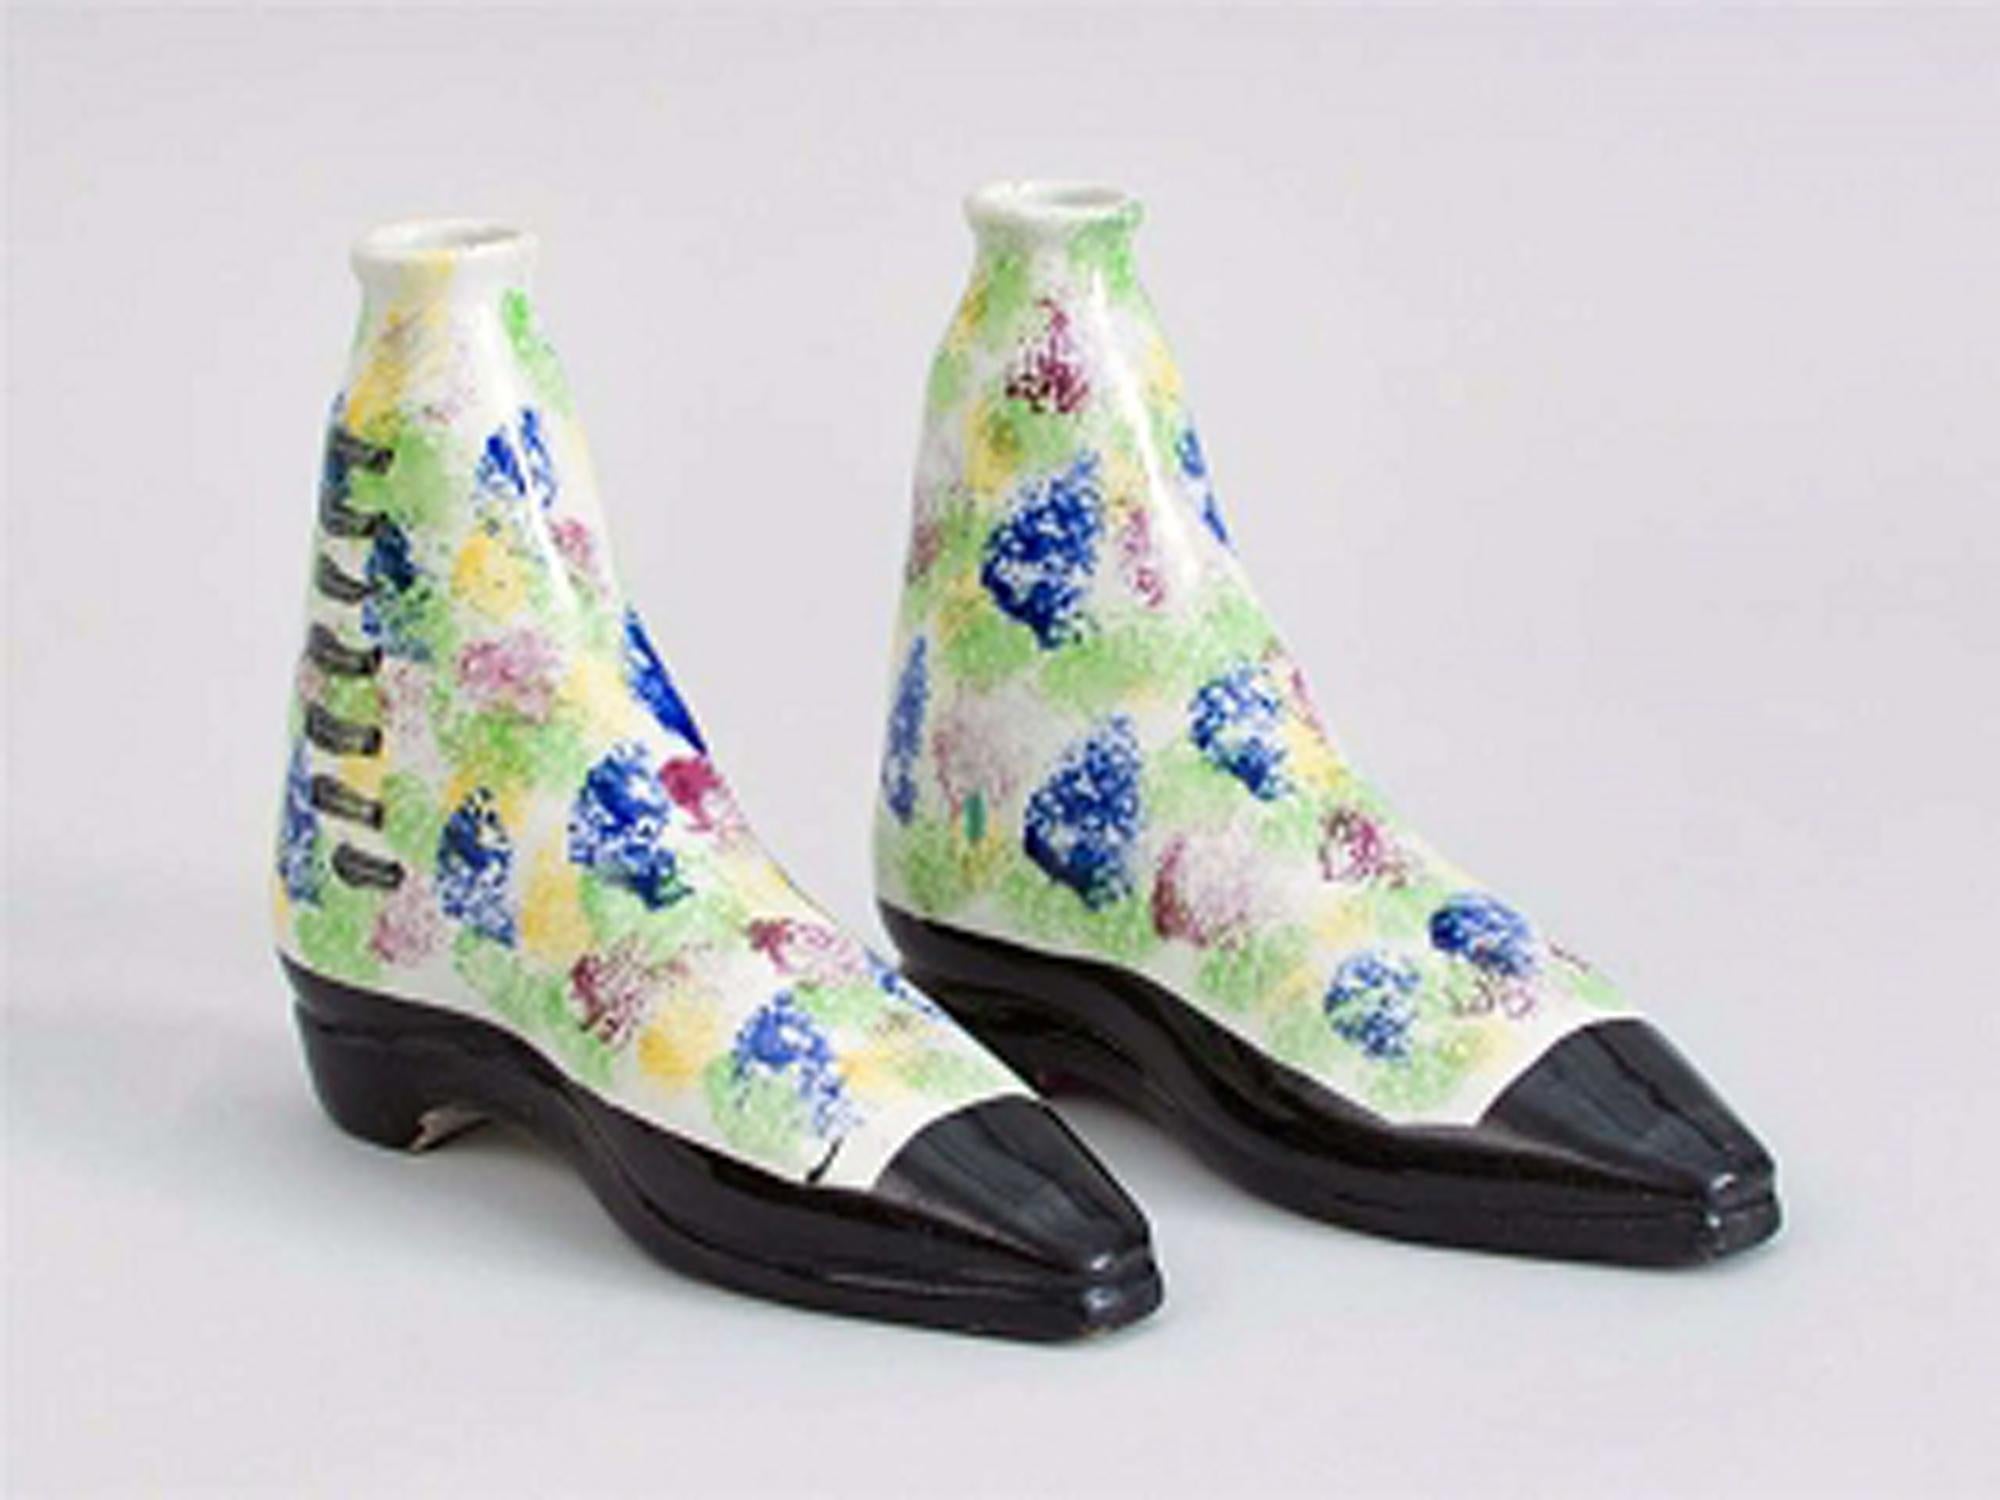 19th Century Pottery Pearlware Sponged Spirit Flasks Modeled in Form of Boots, Scottish For Sale